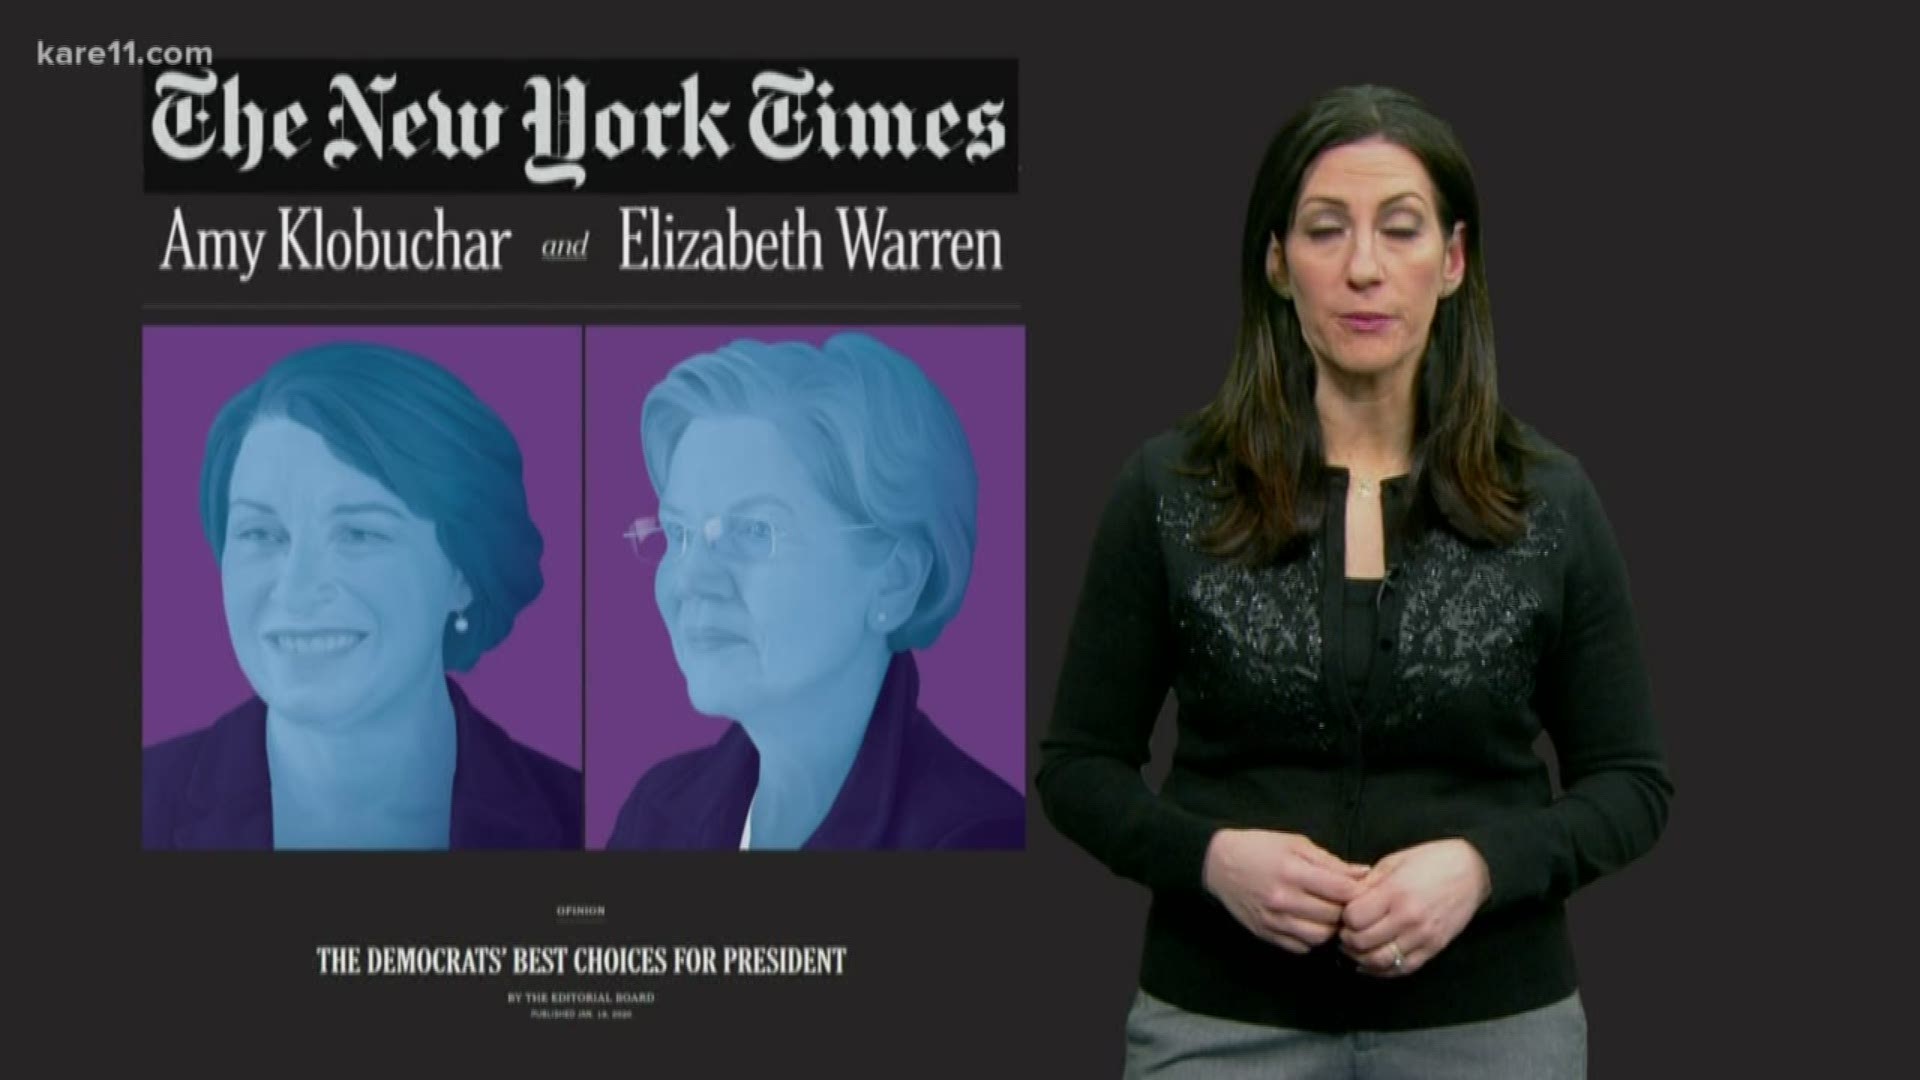 The newspaper changed its approach to presidential endorsements this year, airing footage of candidate interviews and details about the endorsement.